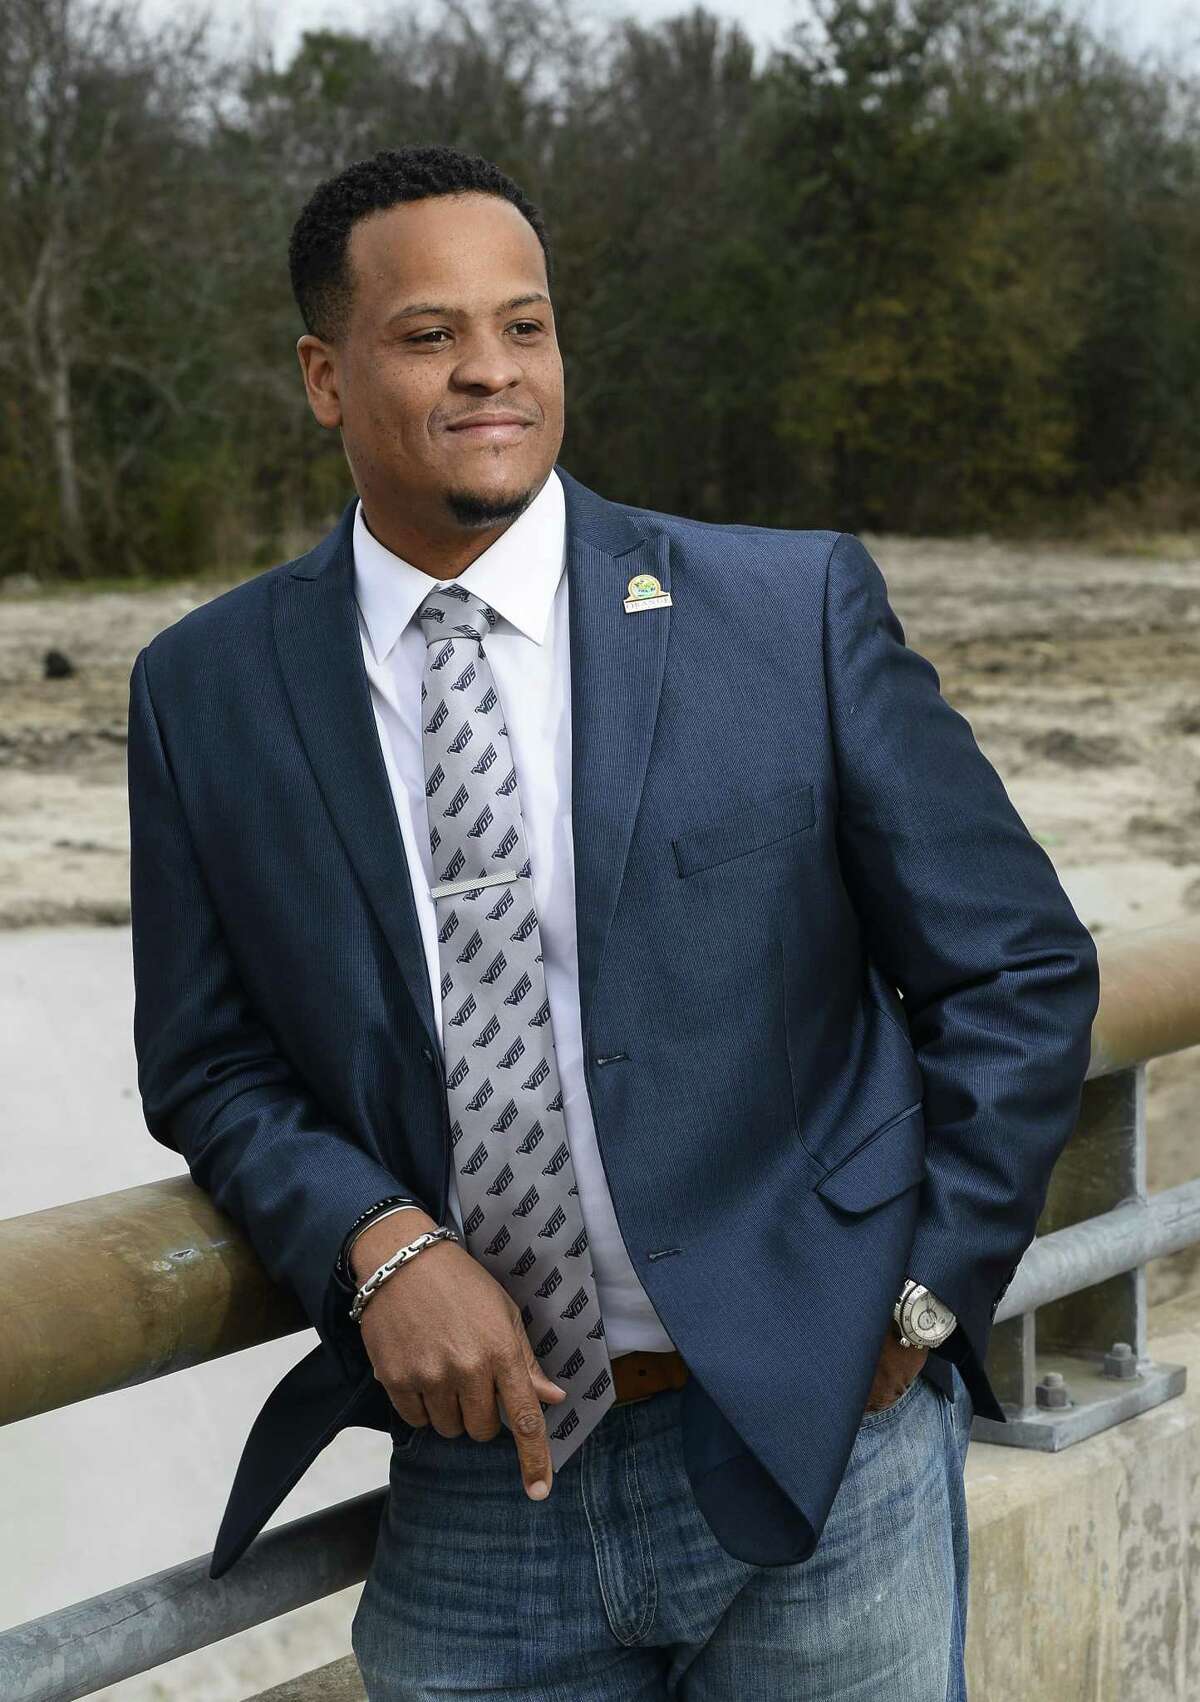 Orange Mayor Larry Spears poses for a photo in front a possible location for a sports complex that he is spearheading for the city. Photo taken on Thursday, 01/31/19. Ryan Welch/The Enterprise